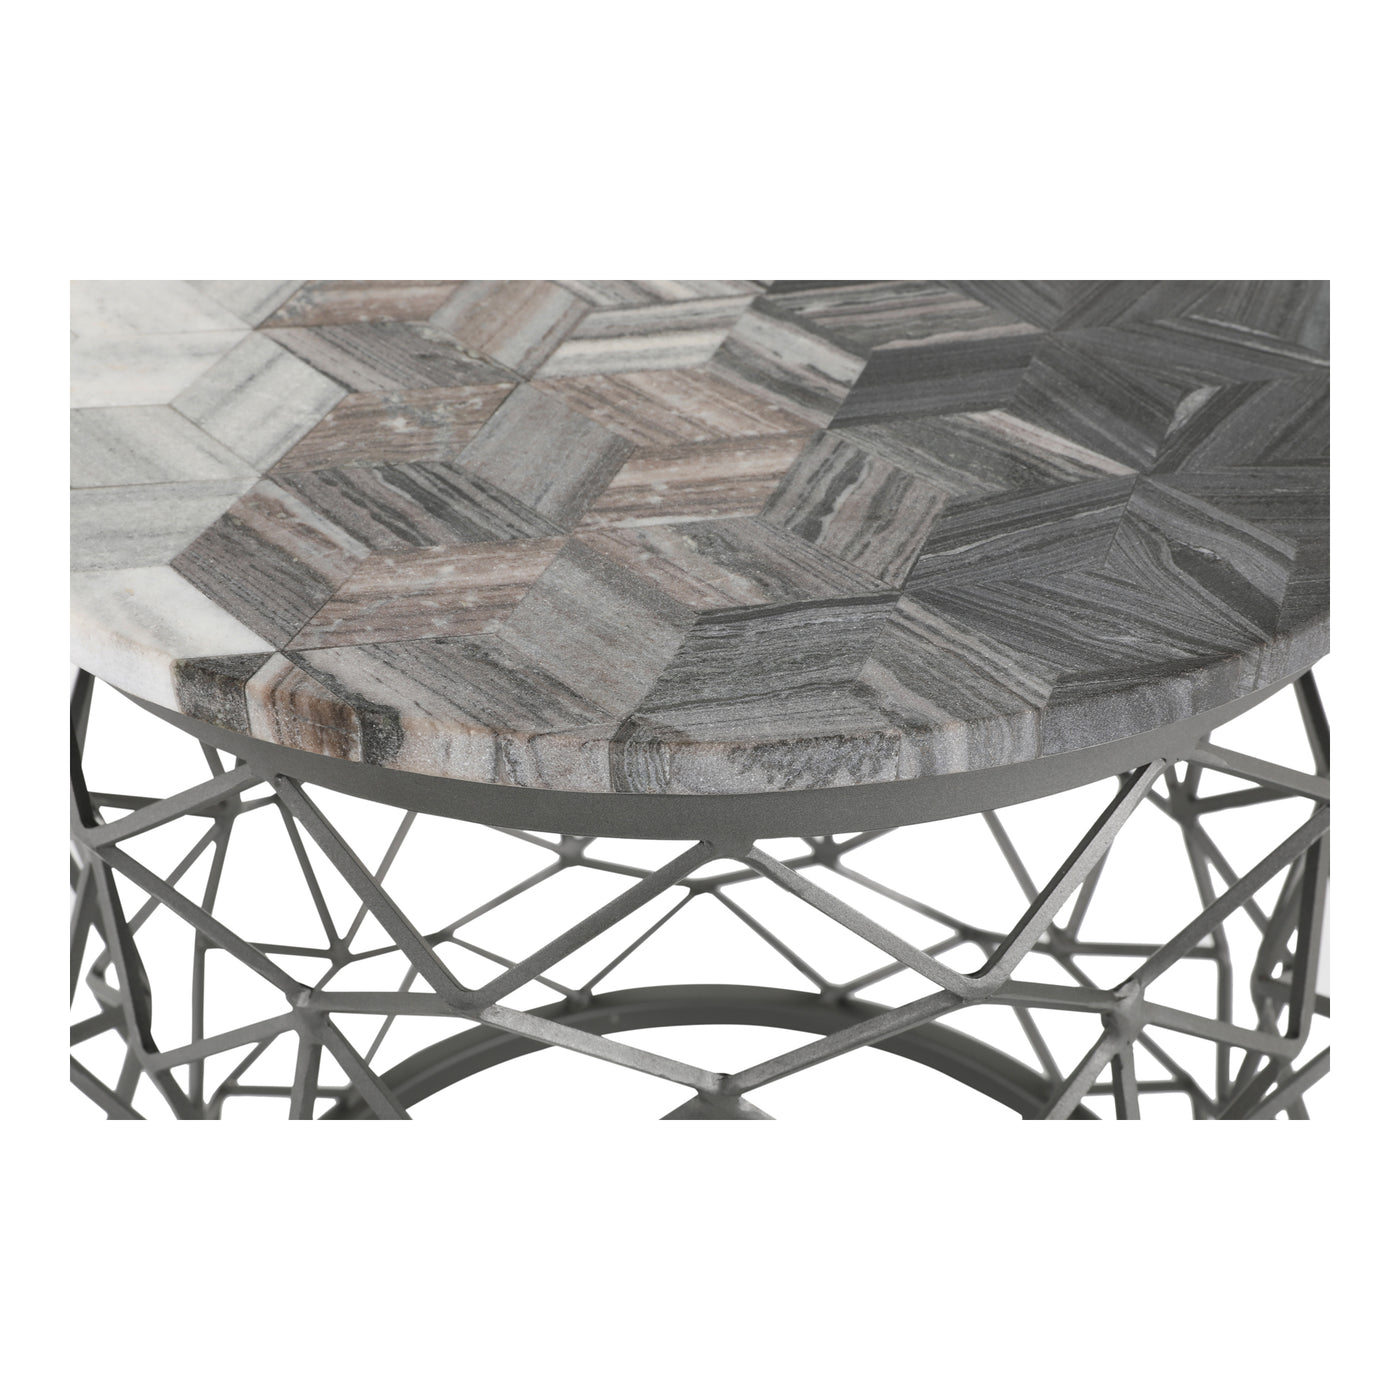 The Mythos doesn't disappoint with it's incredibly designed side table. The 100% polished marble is laid out to create an ...